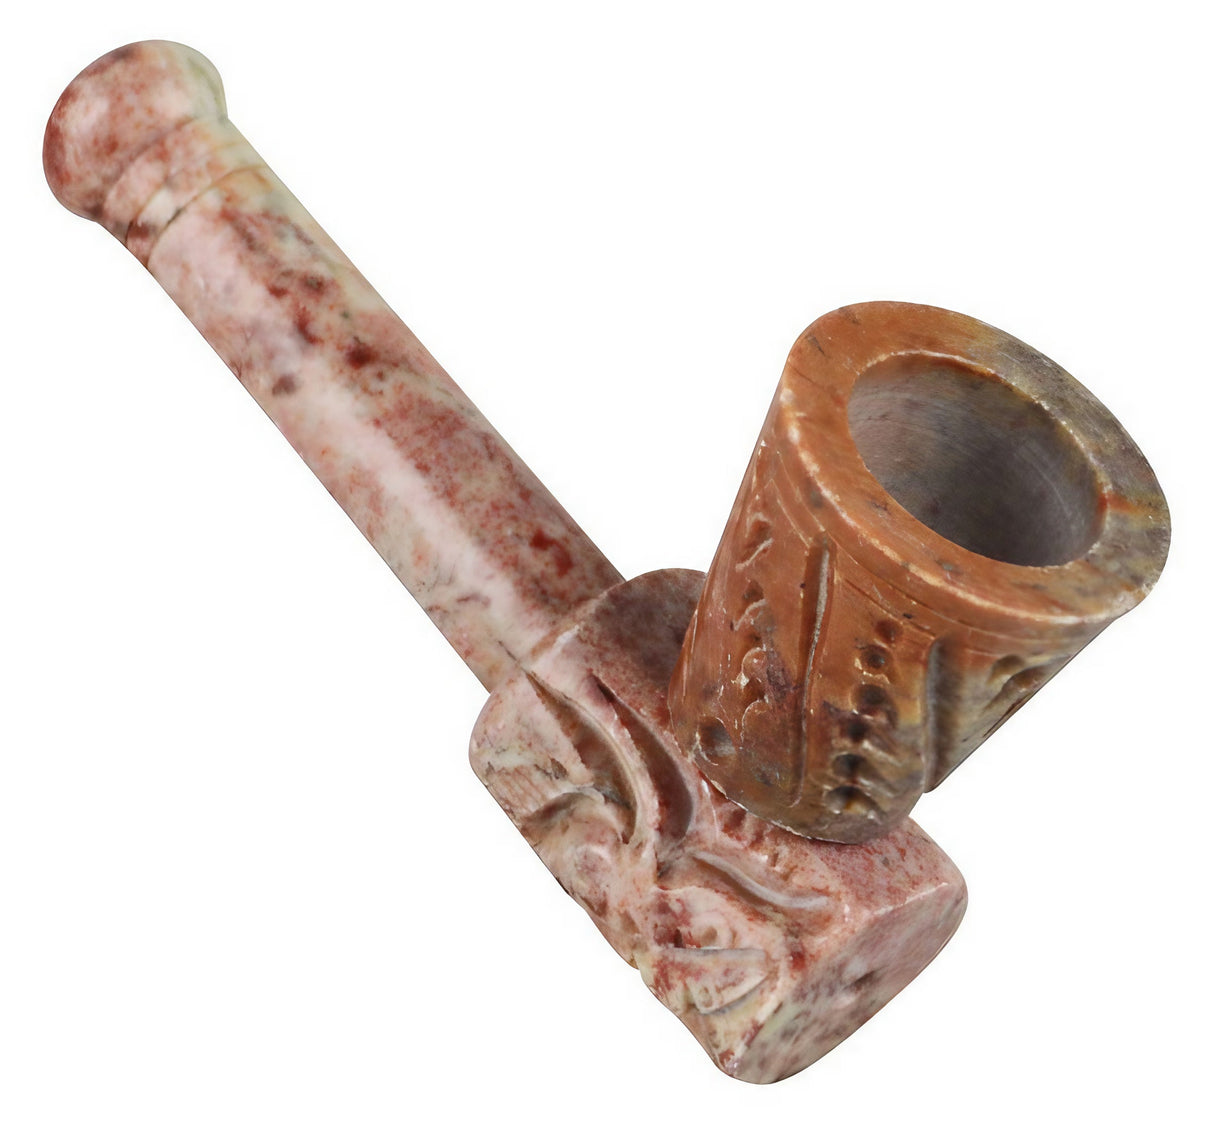 Carved stone hand pipe, portable 3.5" length, for dry herbs, top angled view on white background